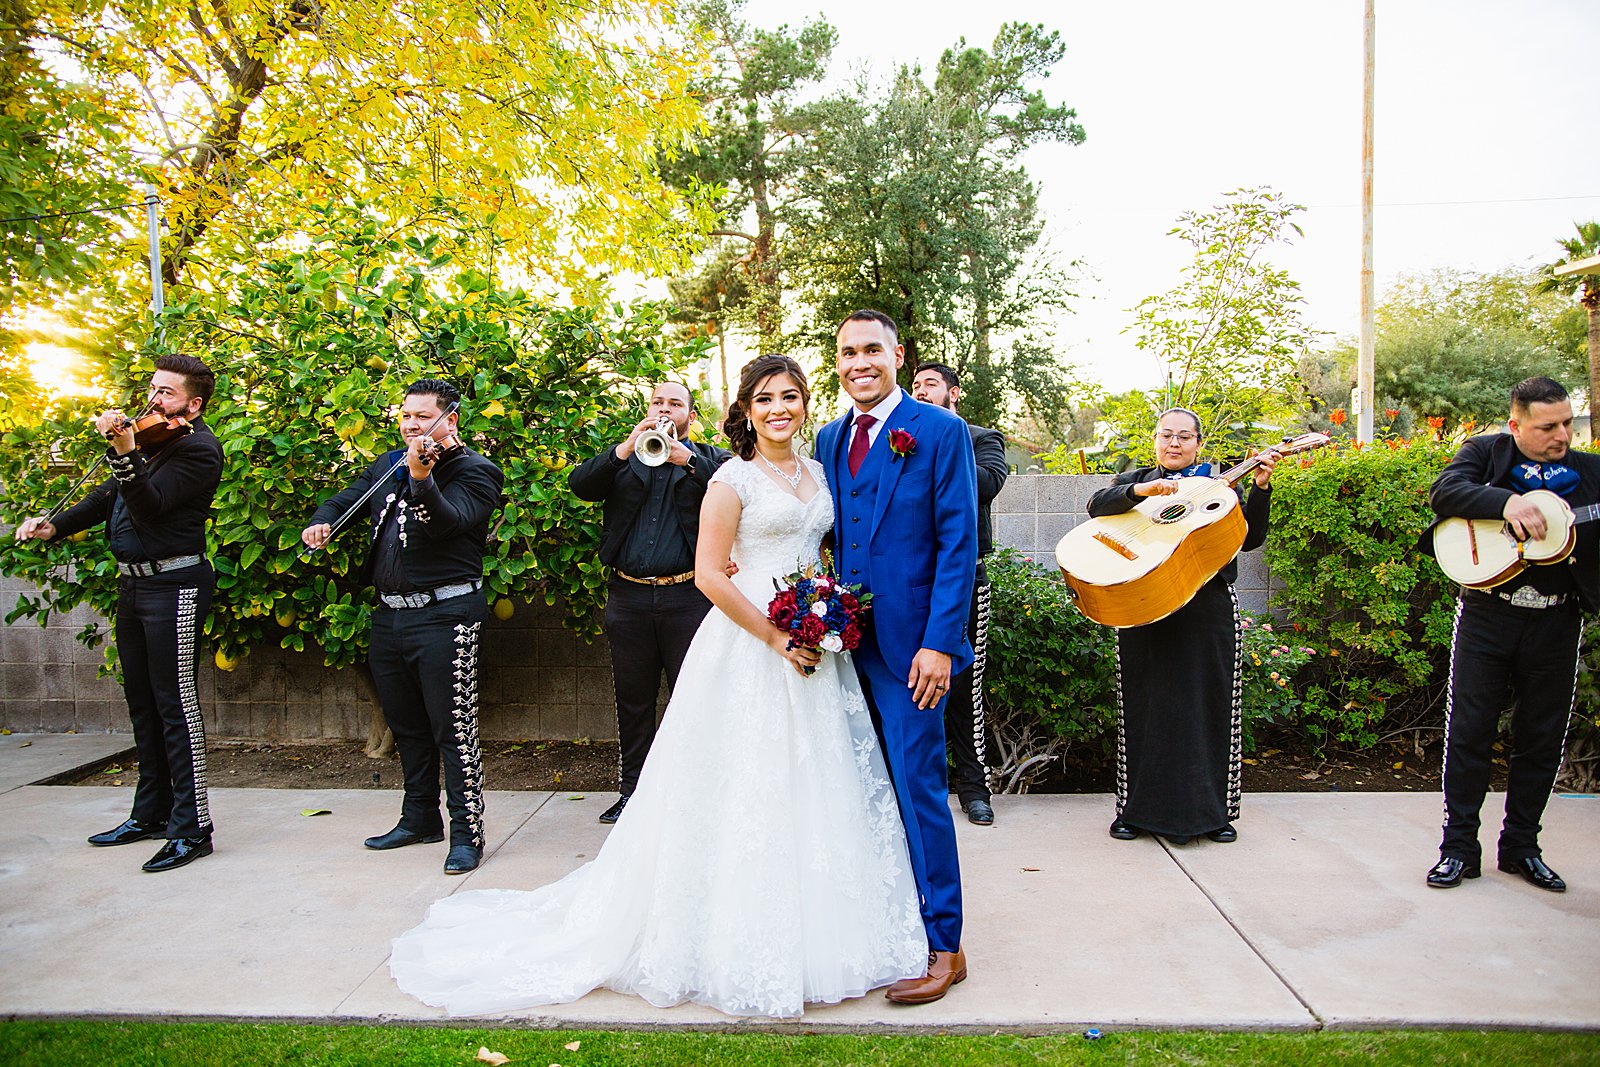 Bride and groom with a mariachi band during cocktail hour at Valley Garden Center wedding by PMA Photography.